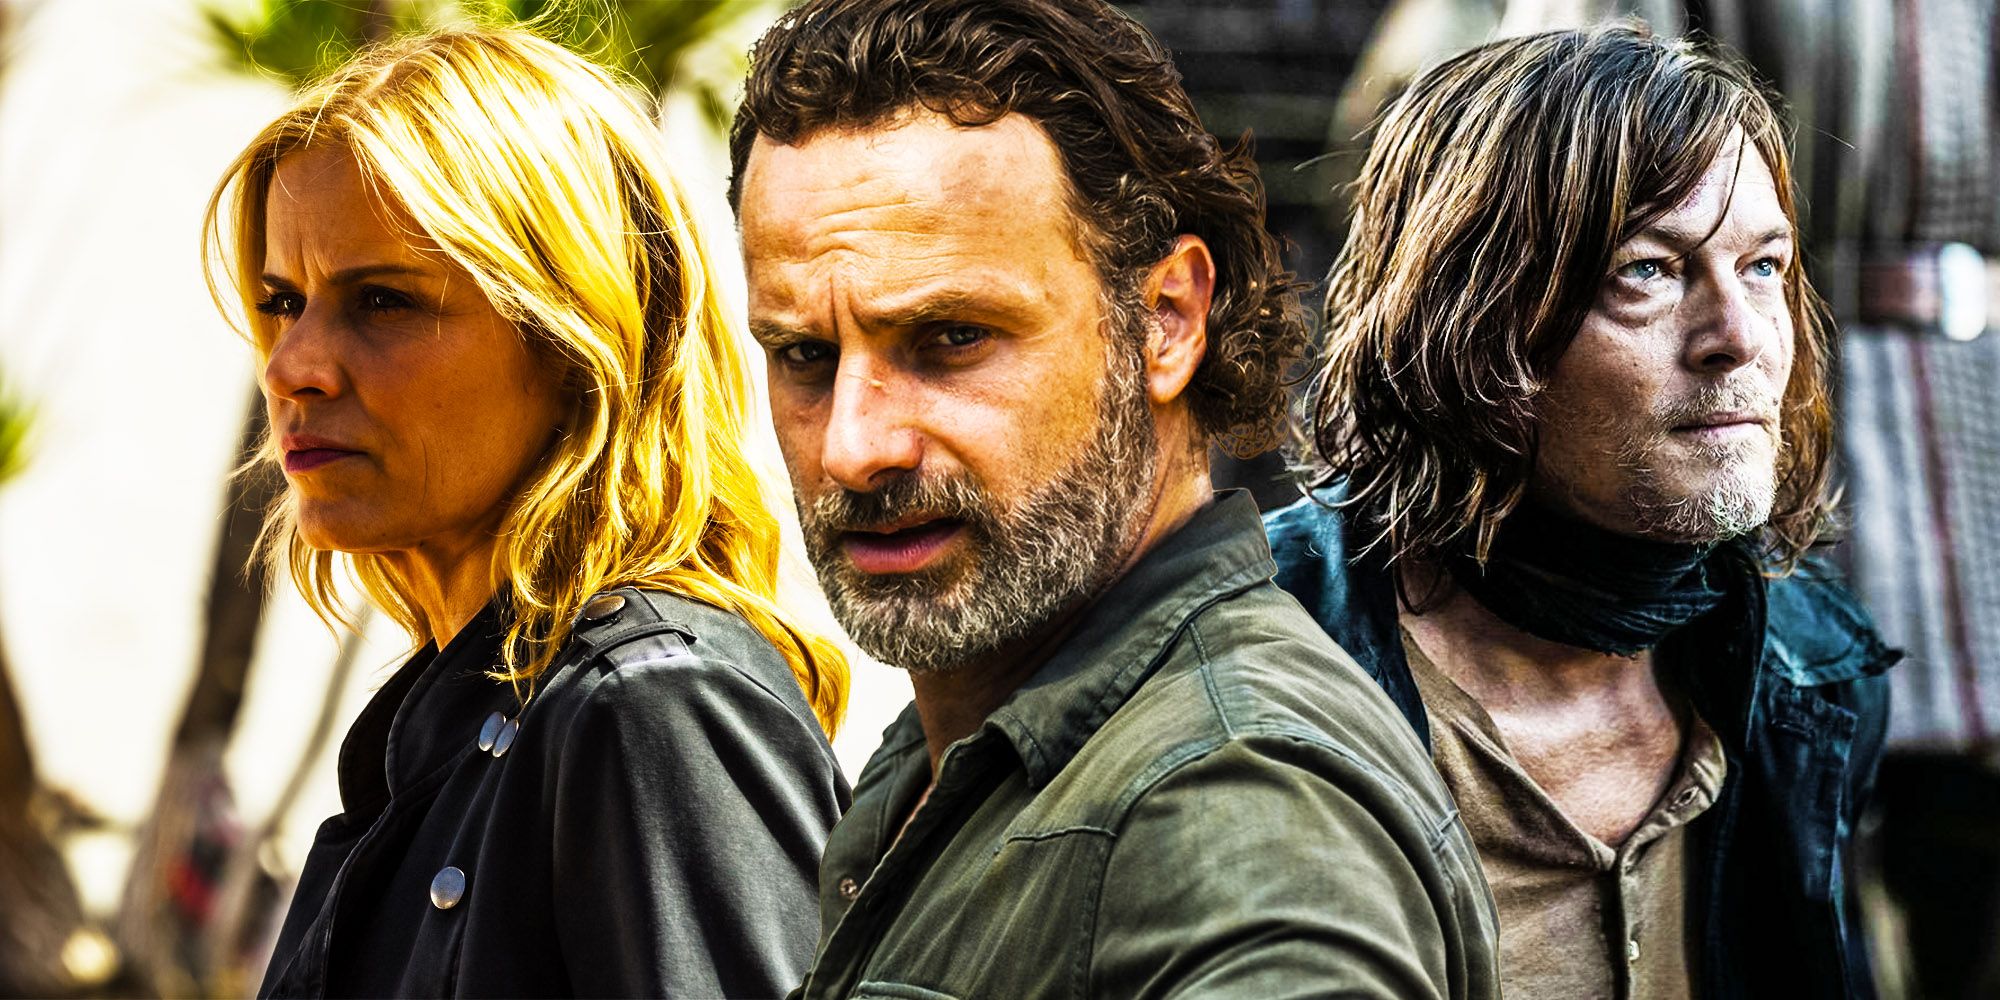 Rick and daryl the walking dead Fear the walking dead madison